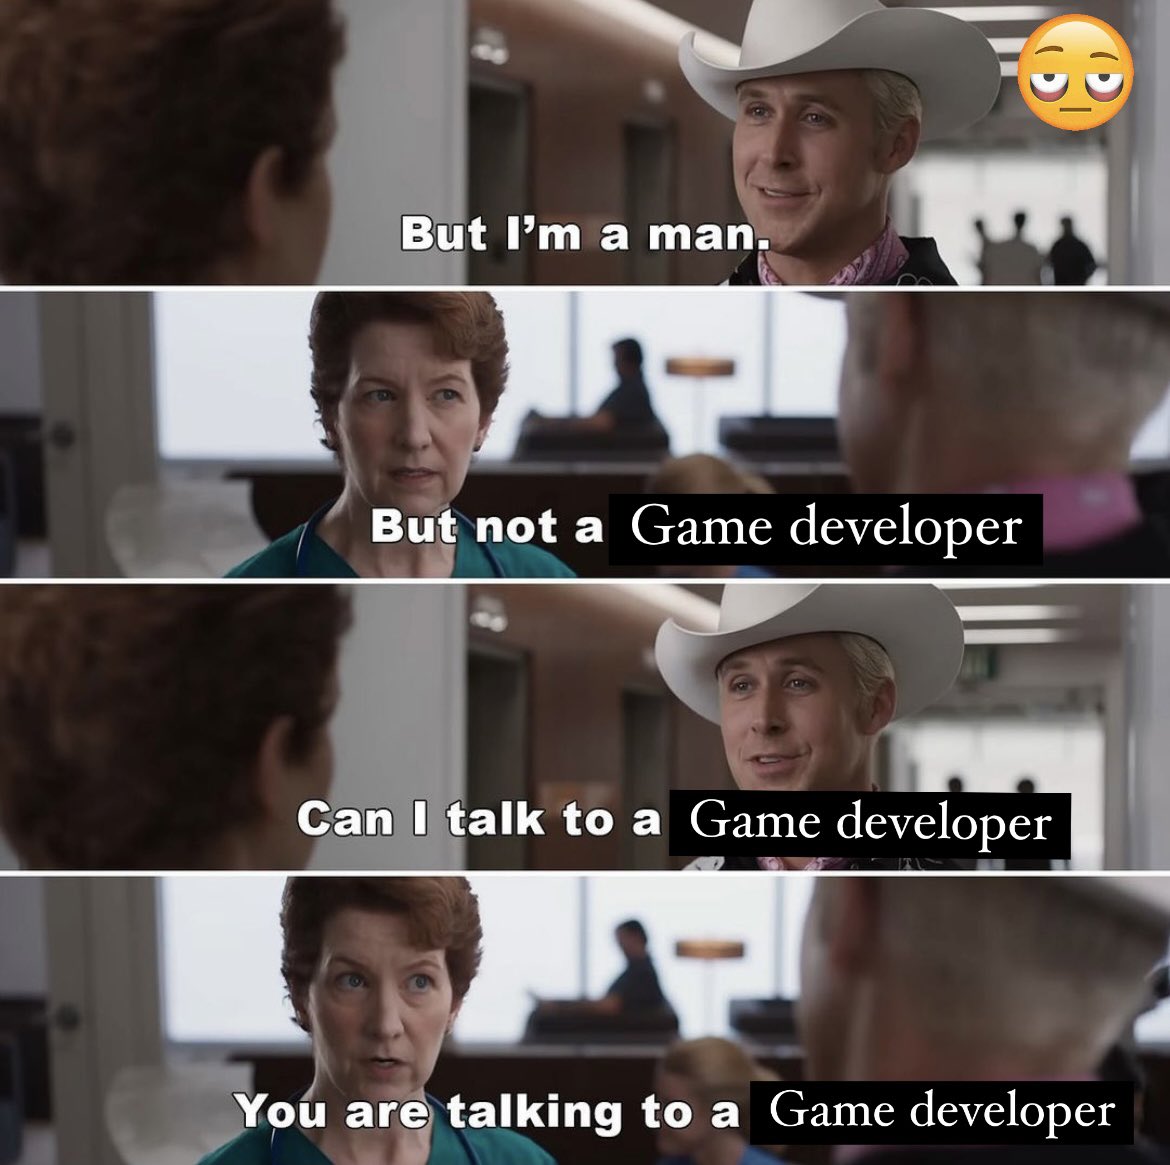 Had this conversation too many times at conventions. 
#gamedev #womeningames #indiegamedev